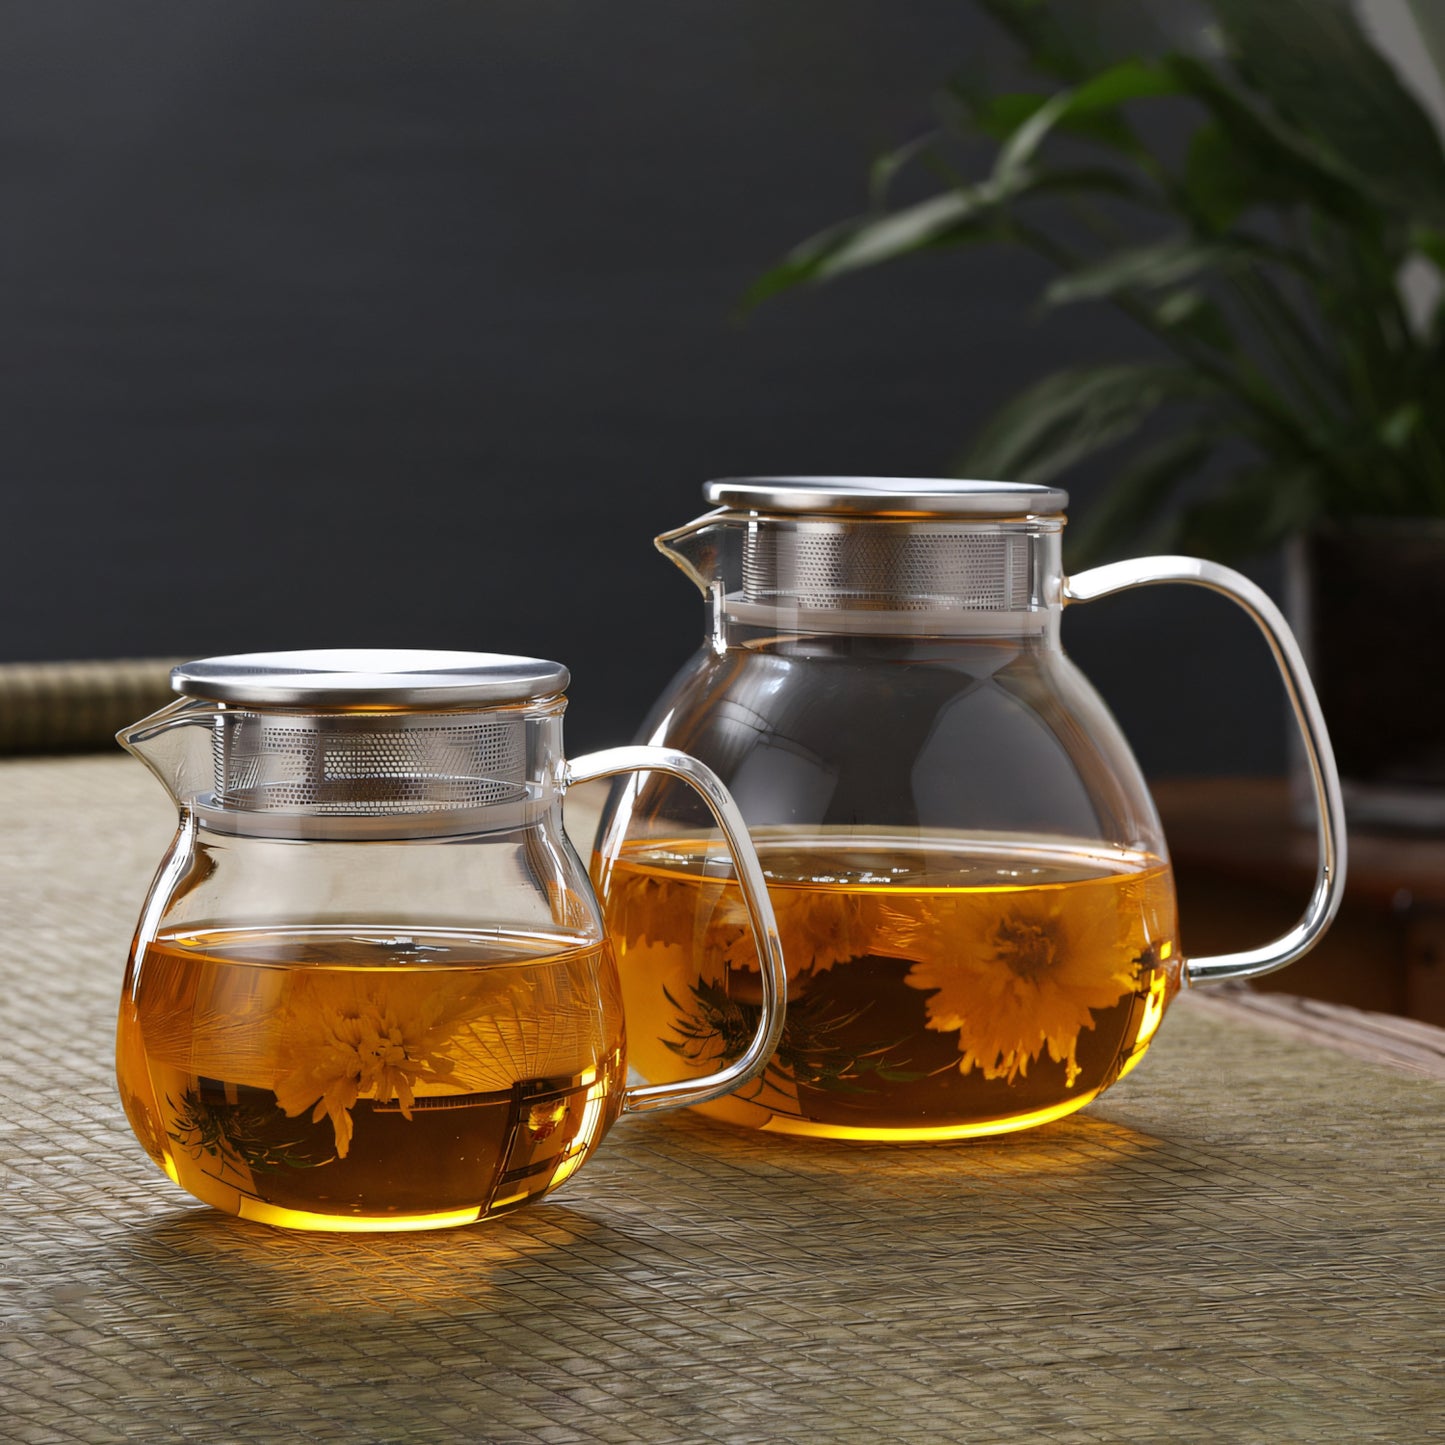 Popular item for repeated purchases IwaiLoft One-touch teapot Heat-resistant glass Glass pot Glass teapot Tea pot Easy-to-handle teapot for 2 to 3 people Milk pitcher Convenient as a jug Direct-fireable Free shipping Dishwasher safe (450mL-700mL)